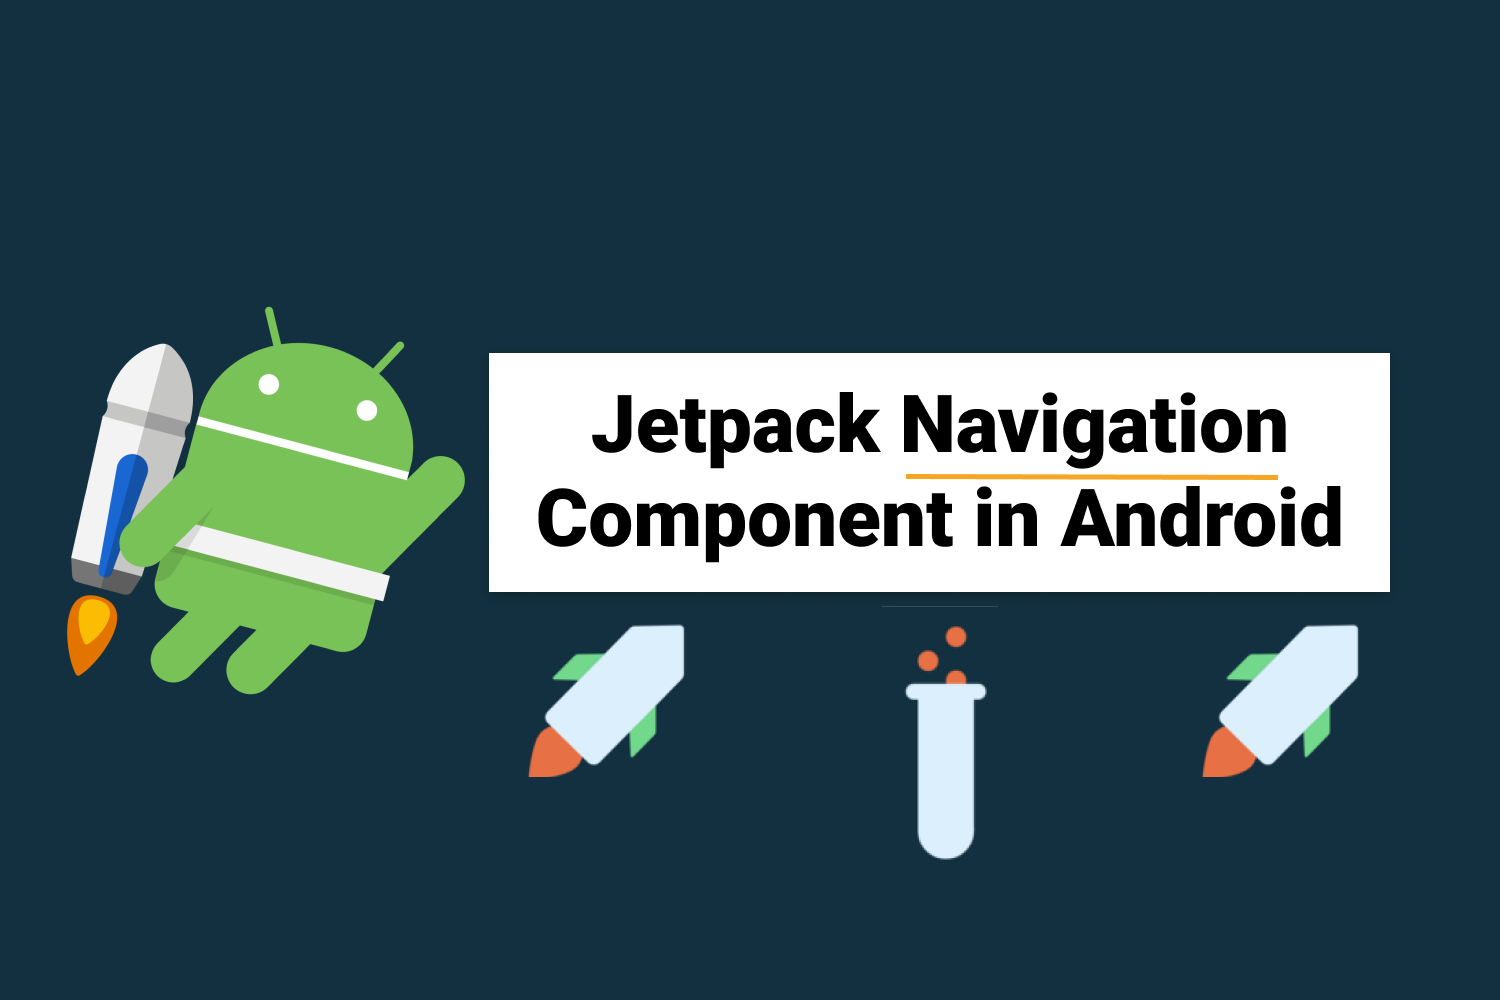 Using Jetpack Navigation Component in Android